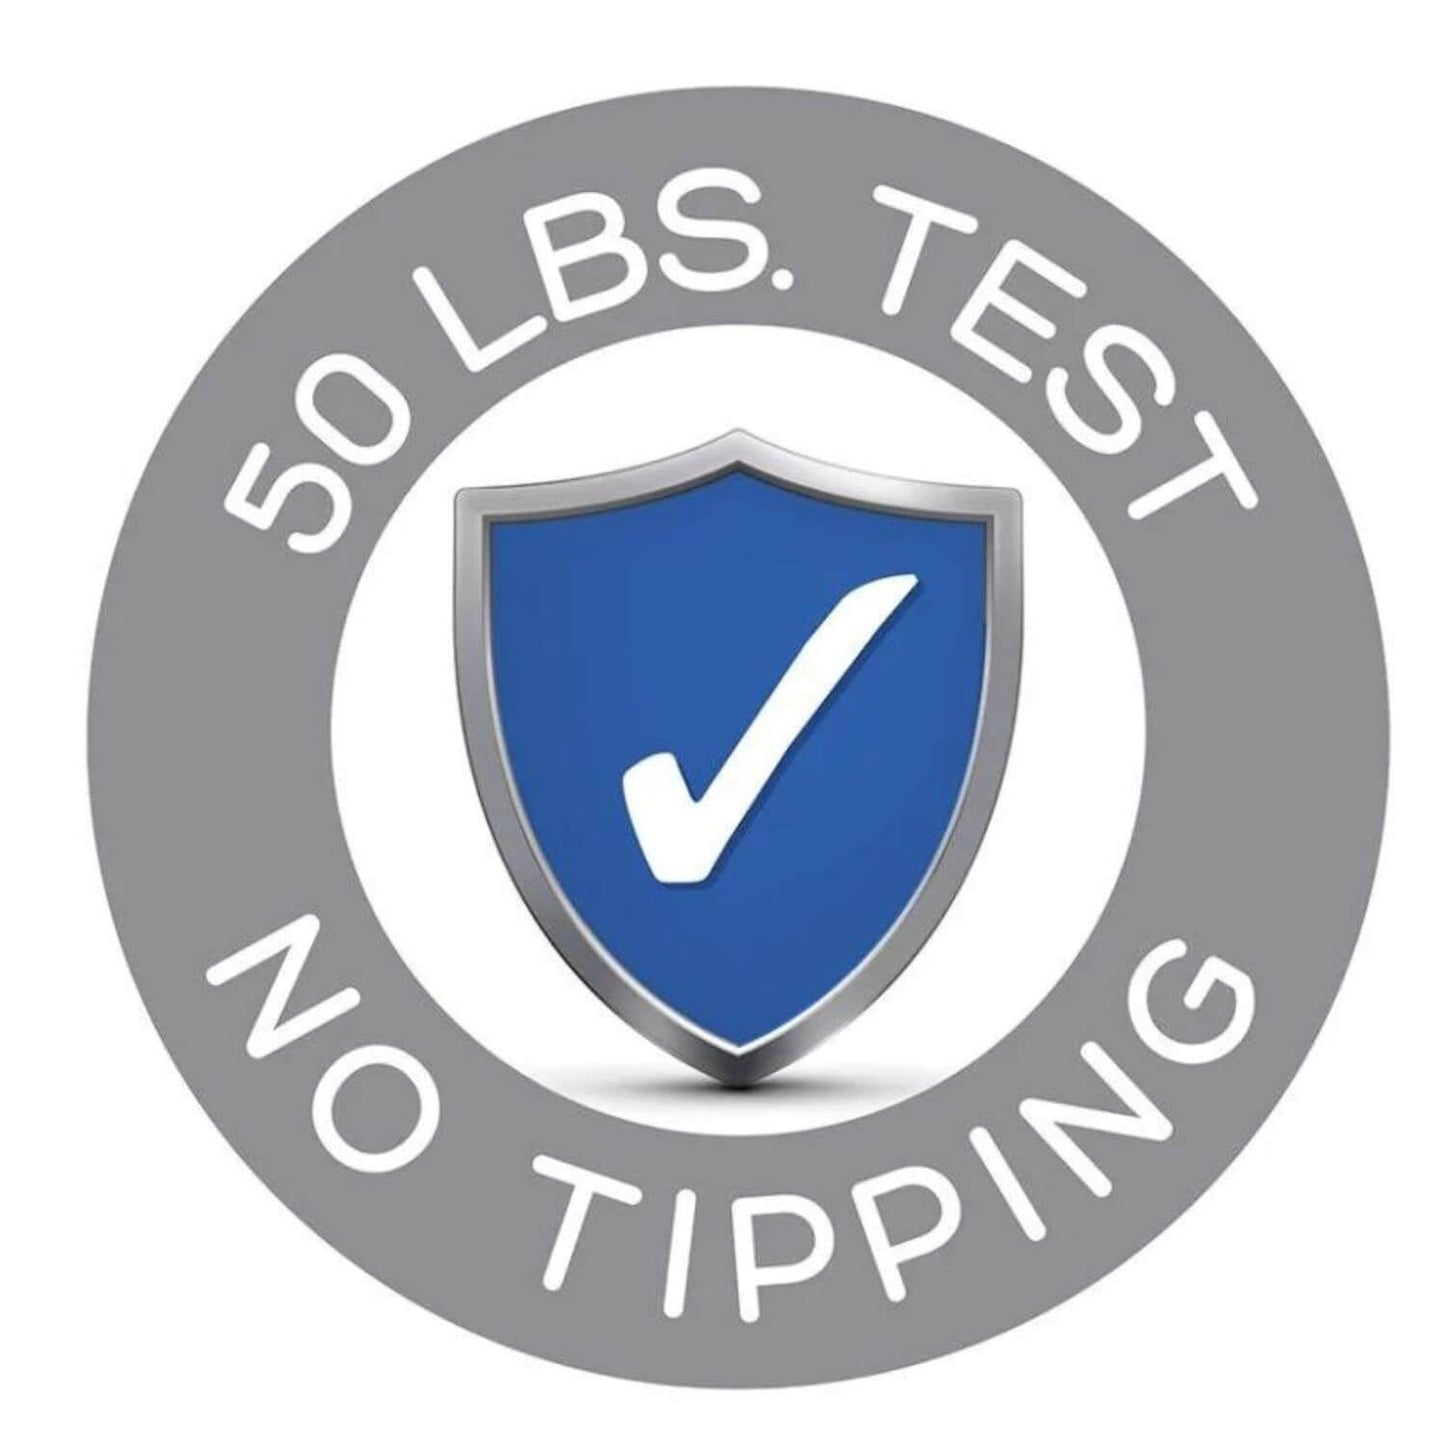 50lbs test - no tipping